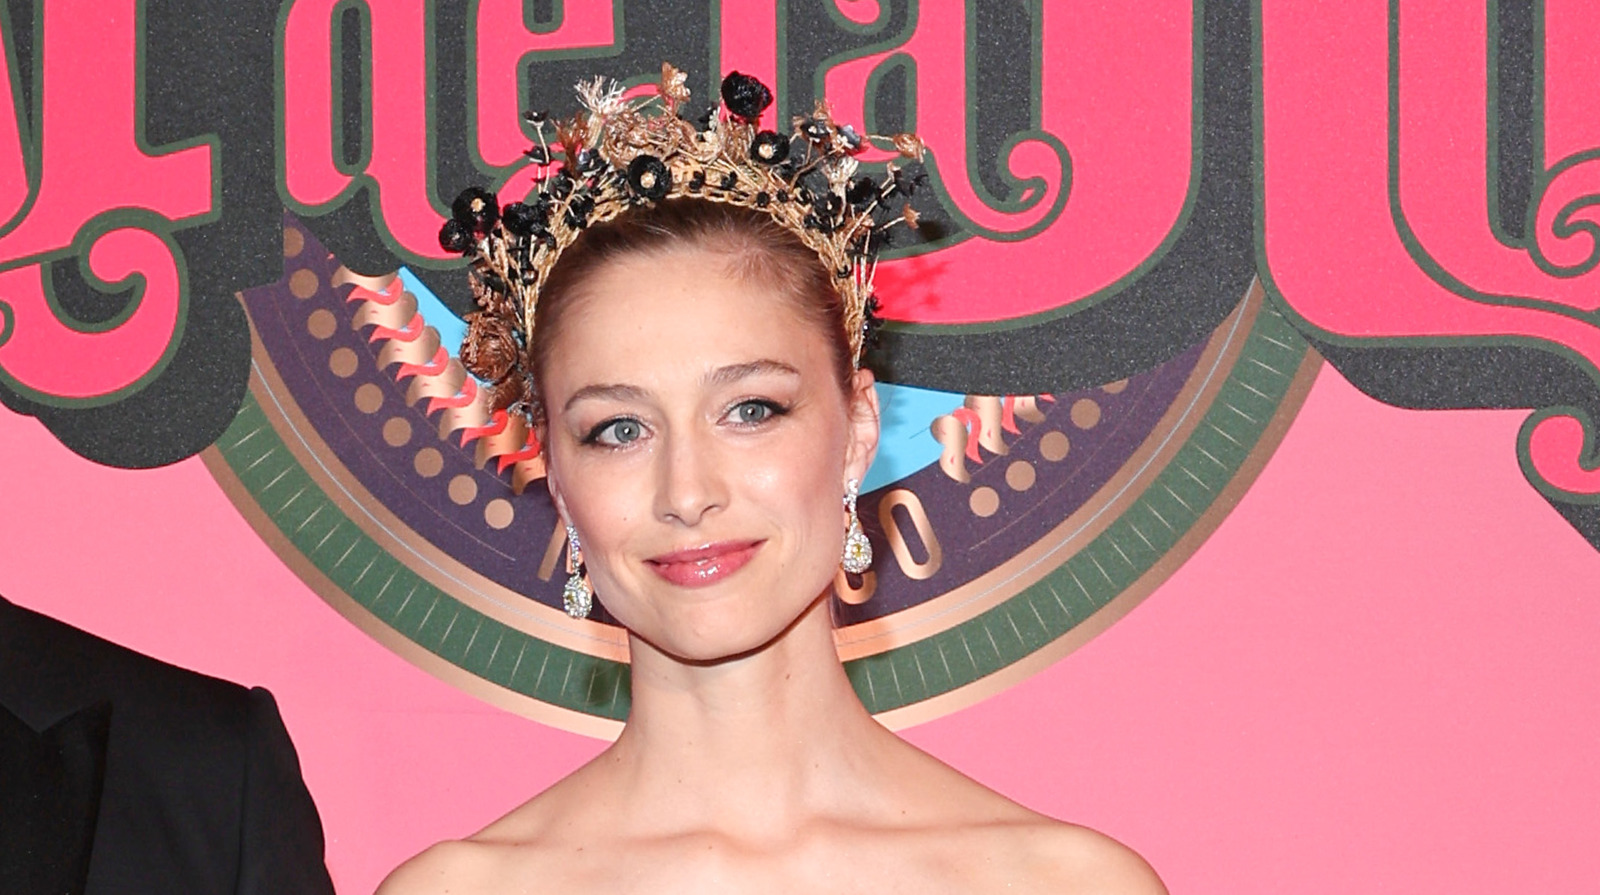 A Look At Beatrice Borromeo's Royal Connections